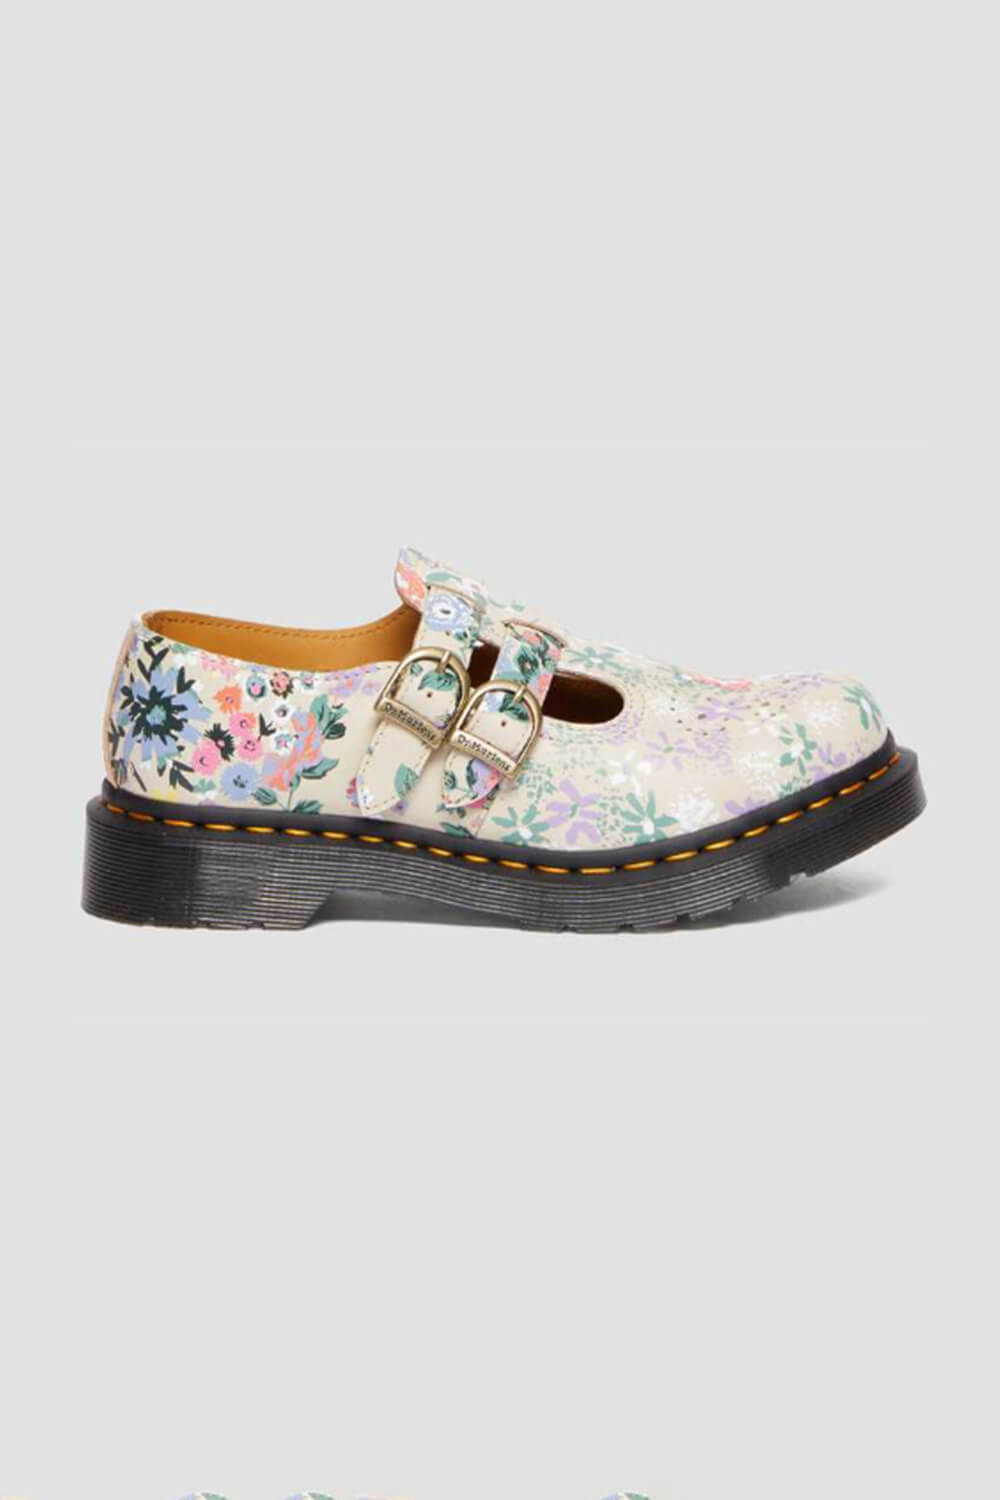 Share more than 214 floral shoes best